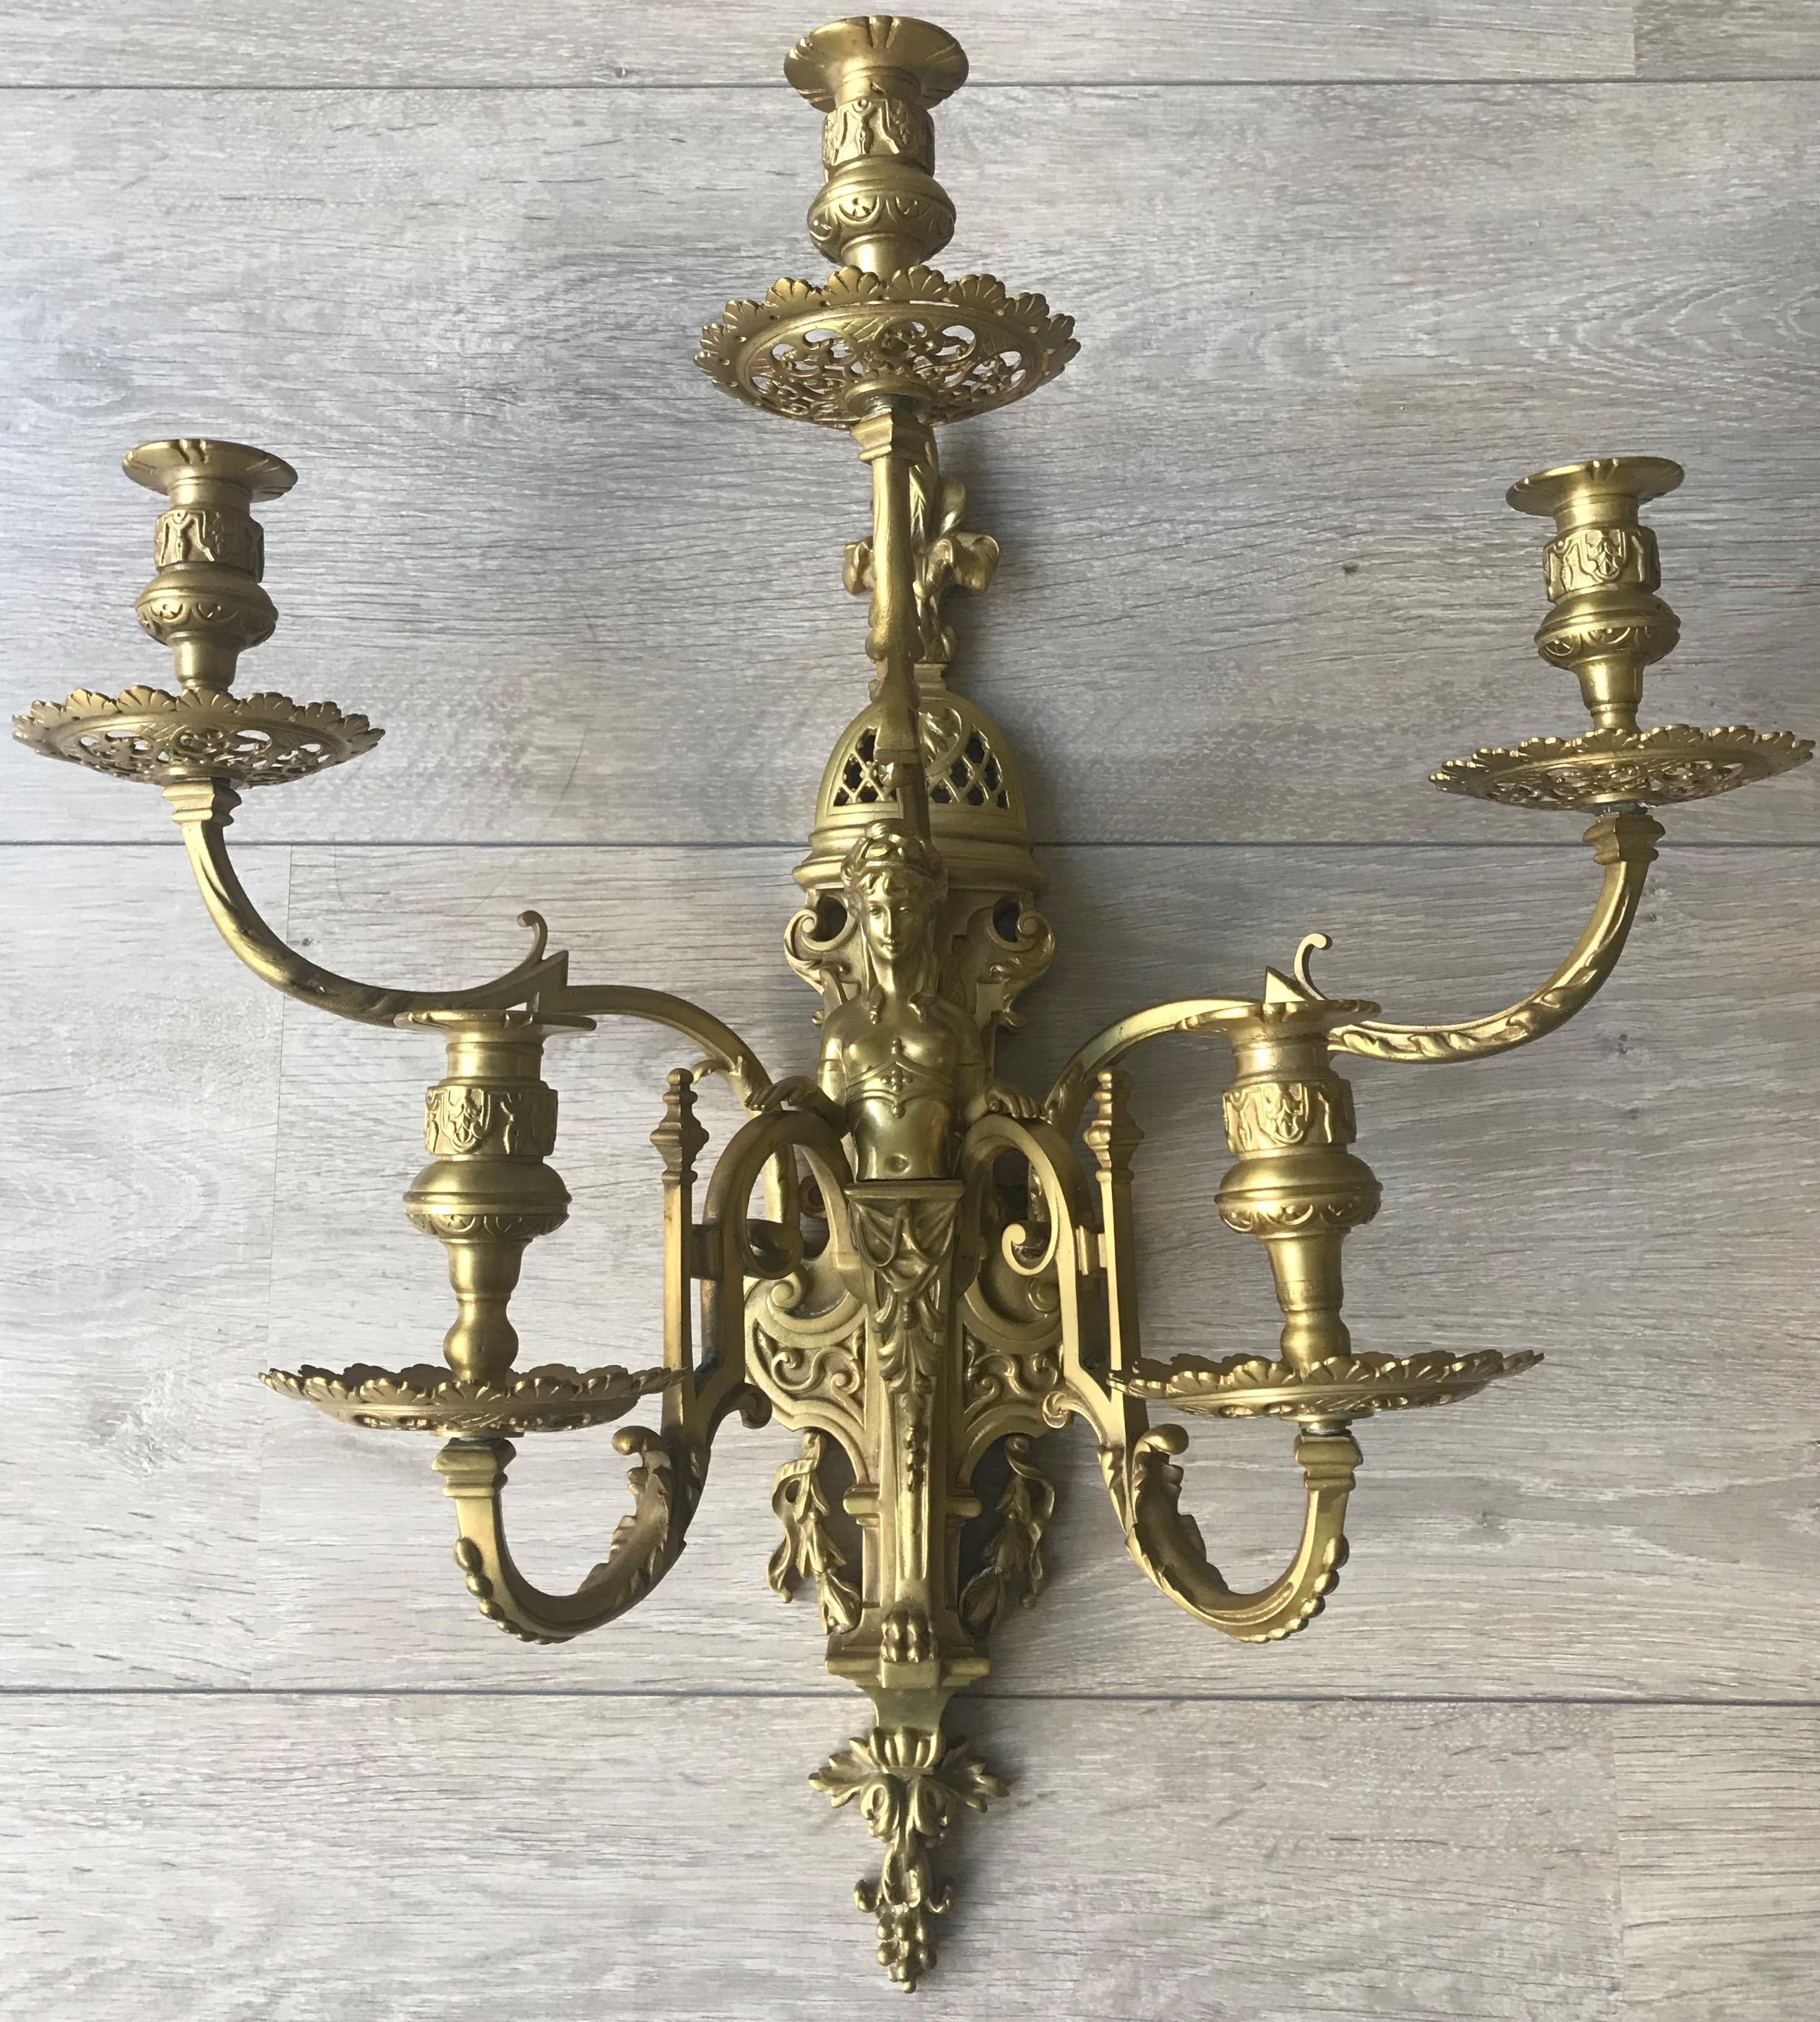 Neoclassical Revival Stunning & Large Antique Bronze Wall Lamp / Candle Sconce with Goddess Sculpture For Sale